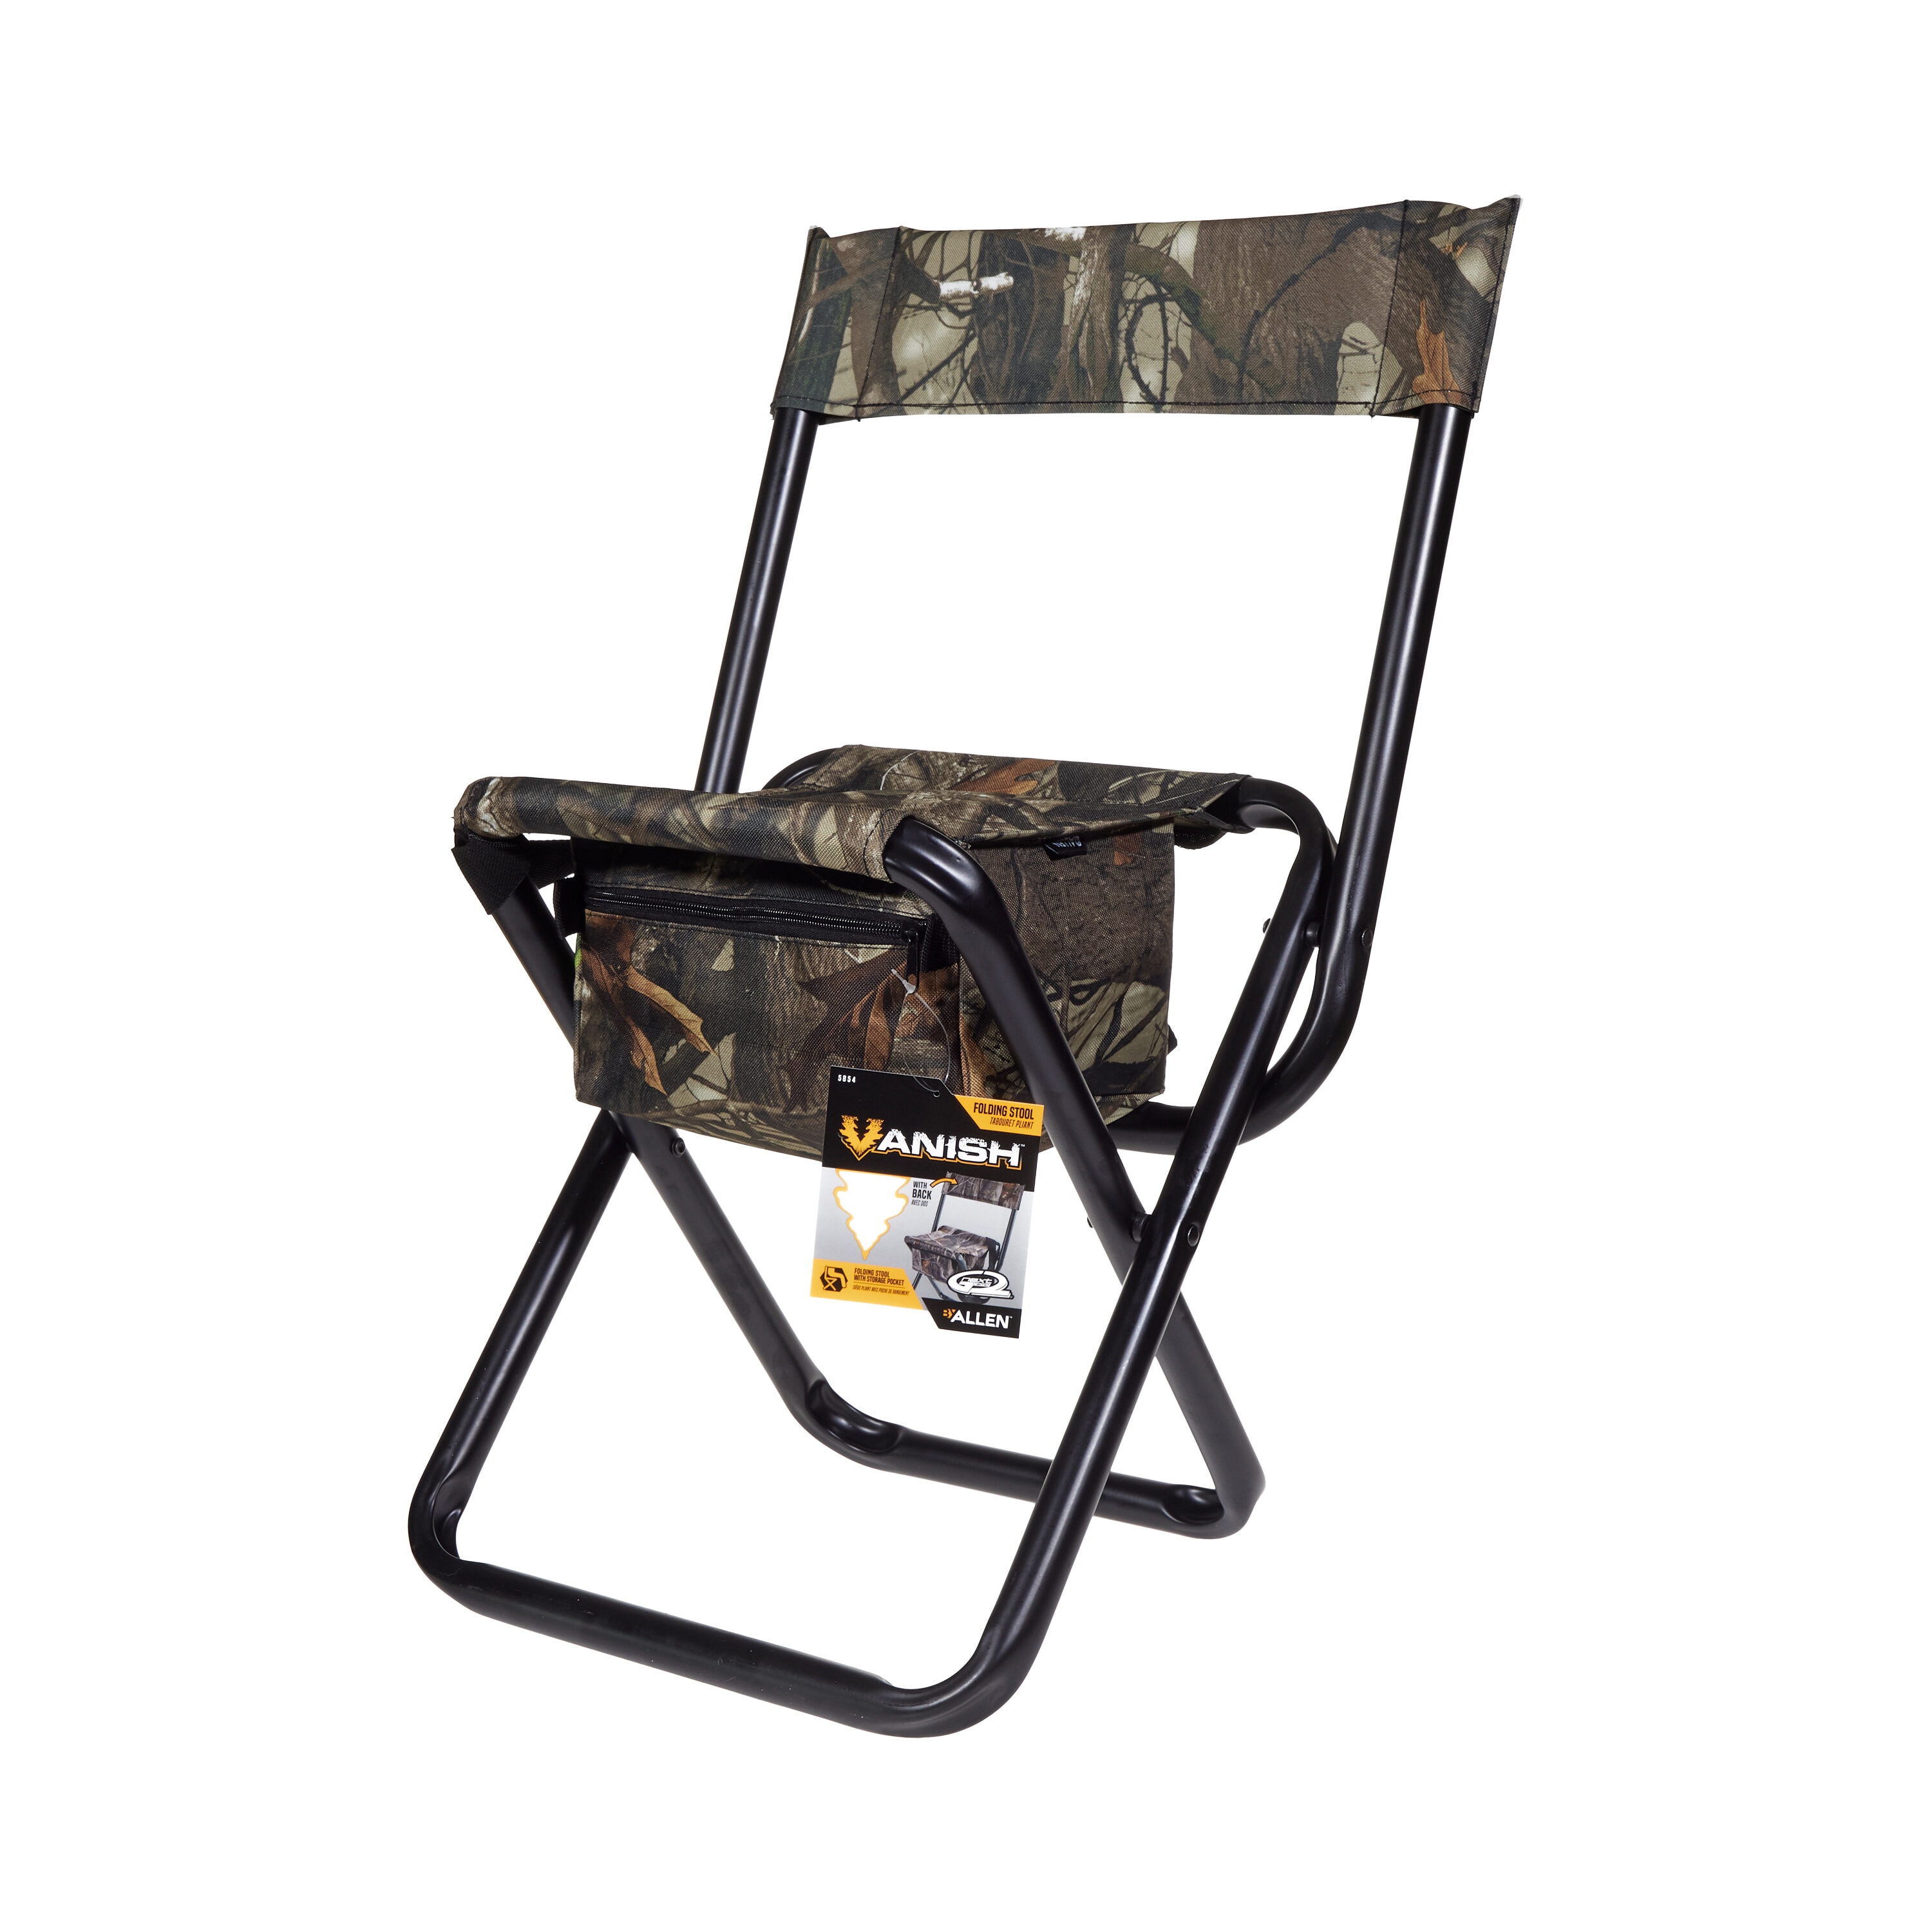 VANISH Next Camo Hunting Stool with Back, Strong Steel Frame